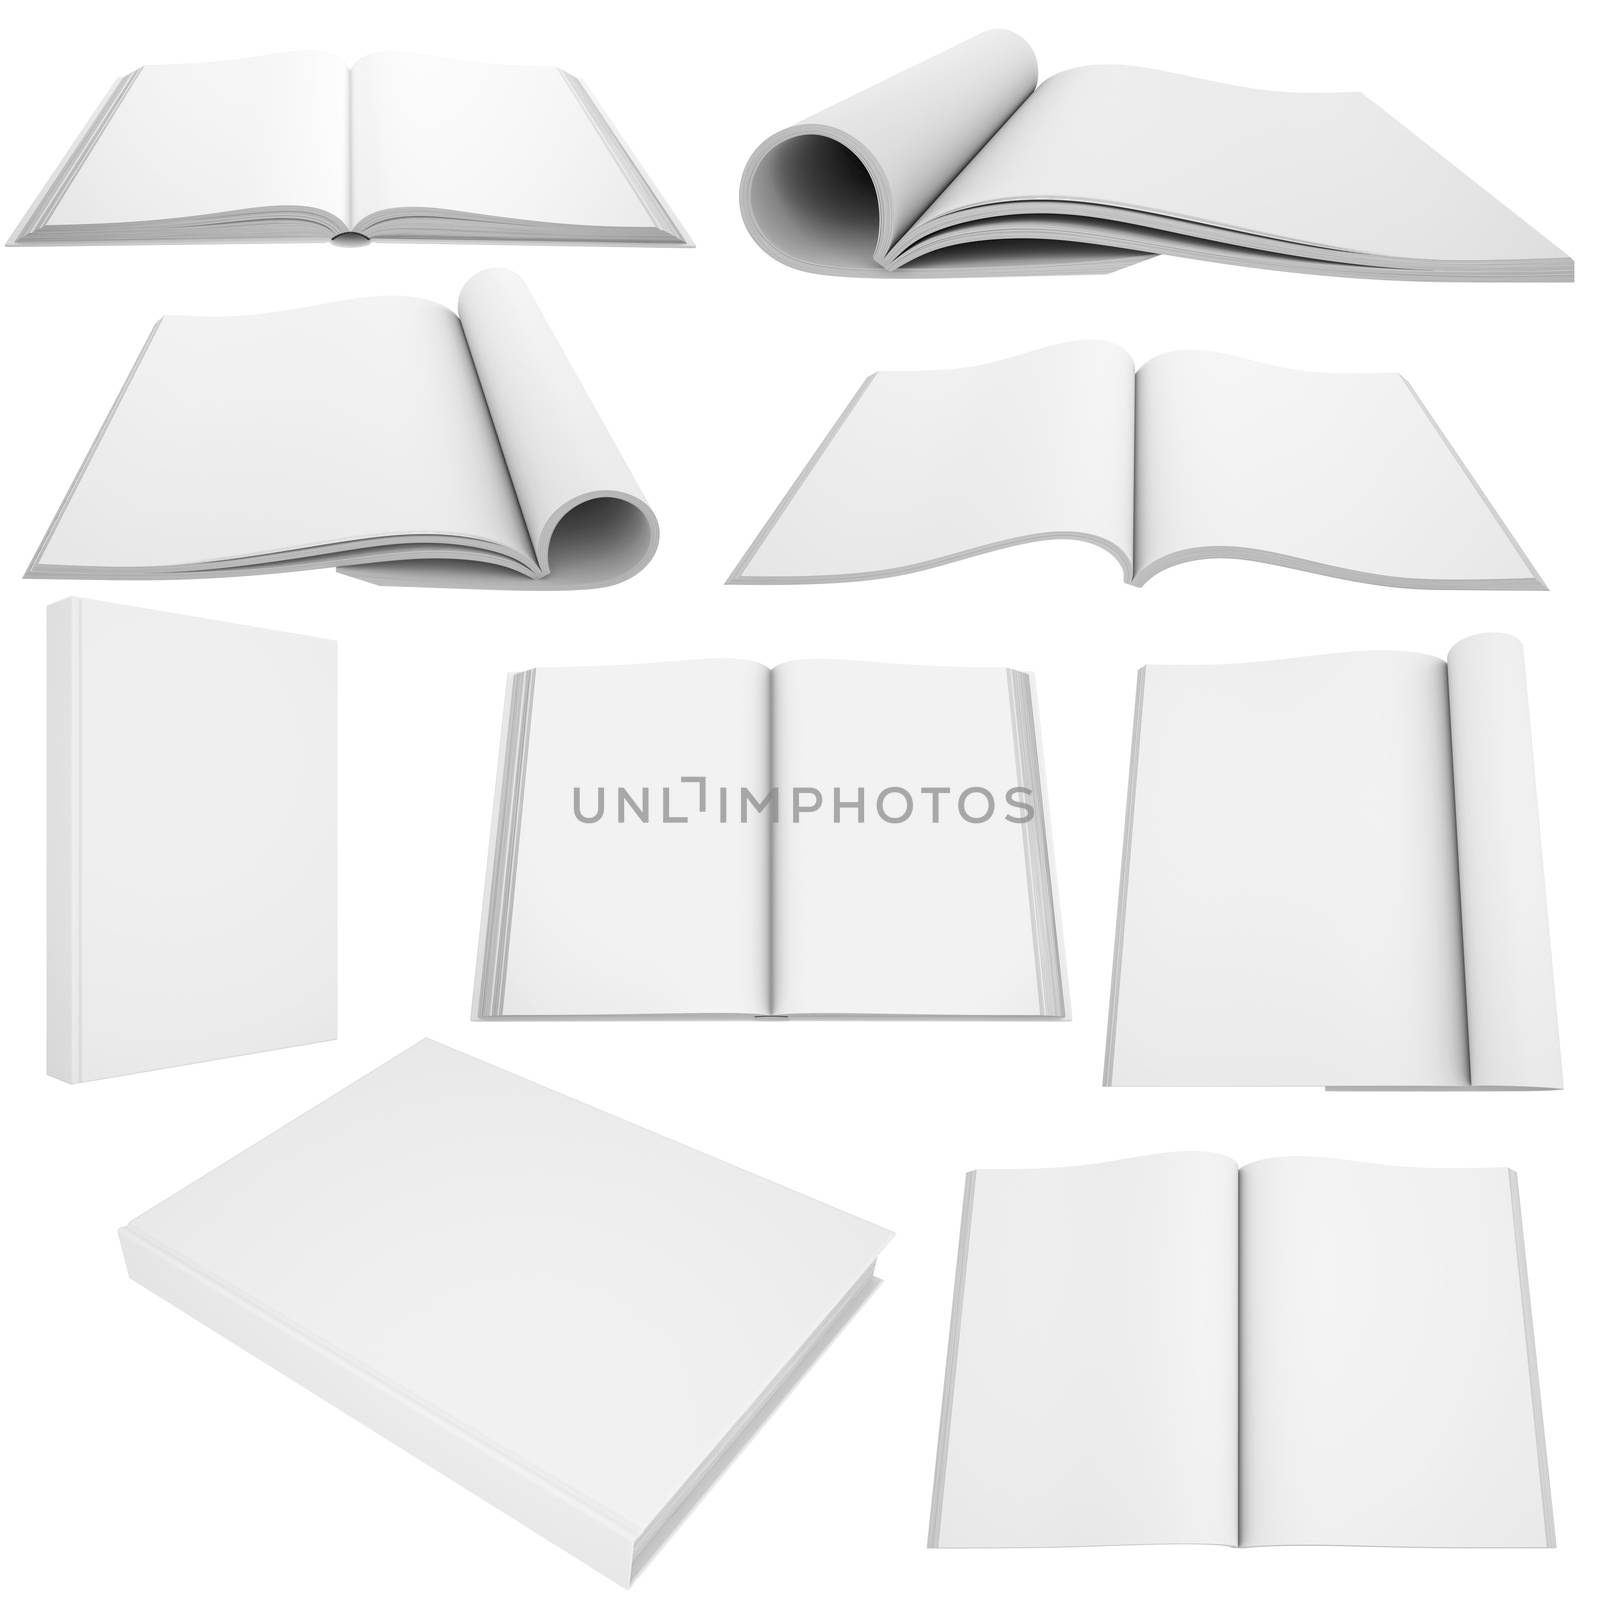 Collection of white books and magazines. Isolated on white background